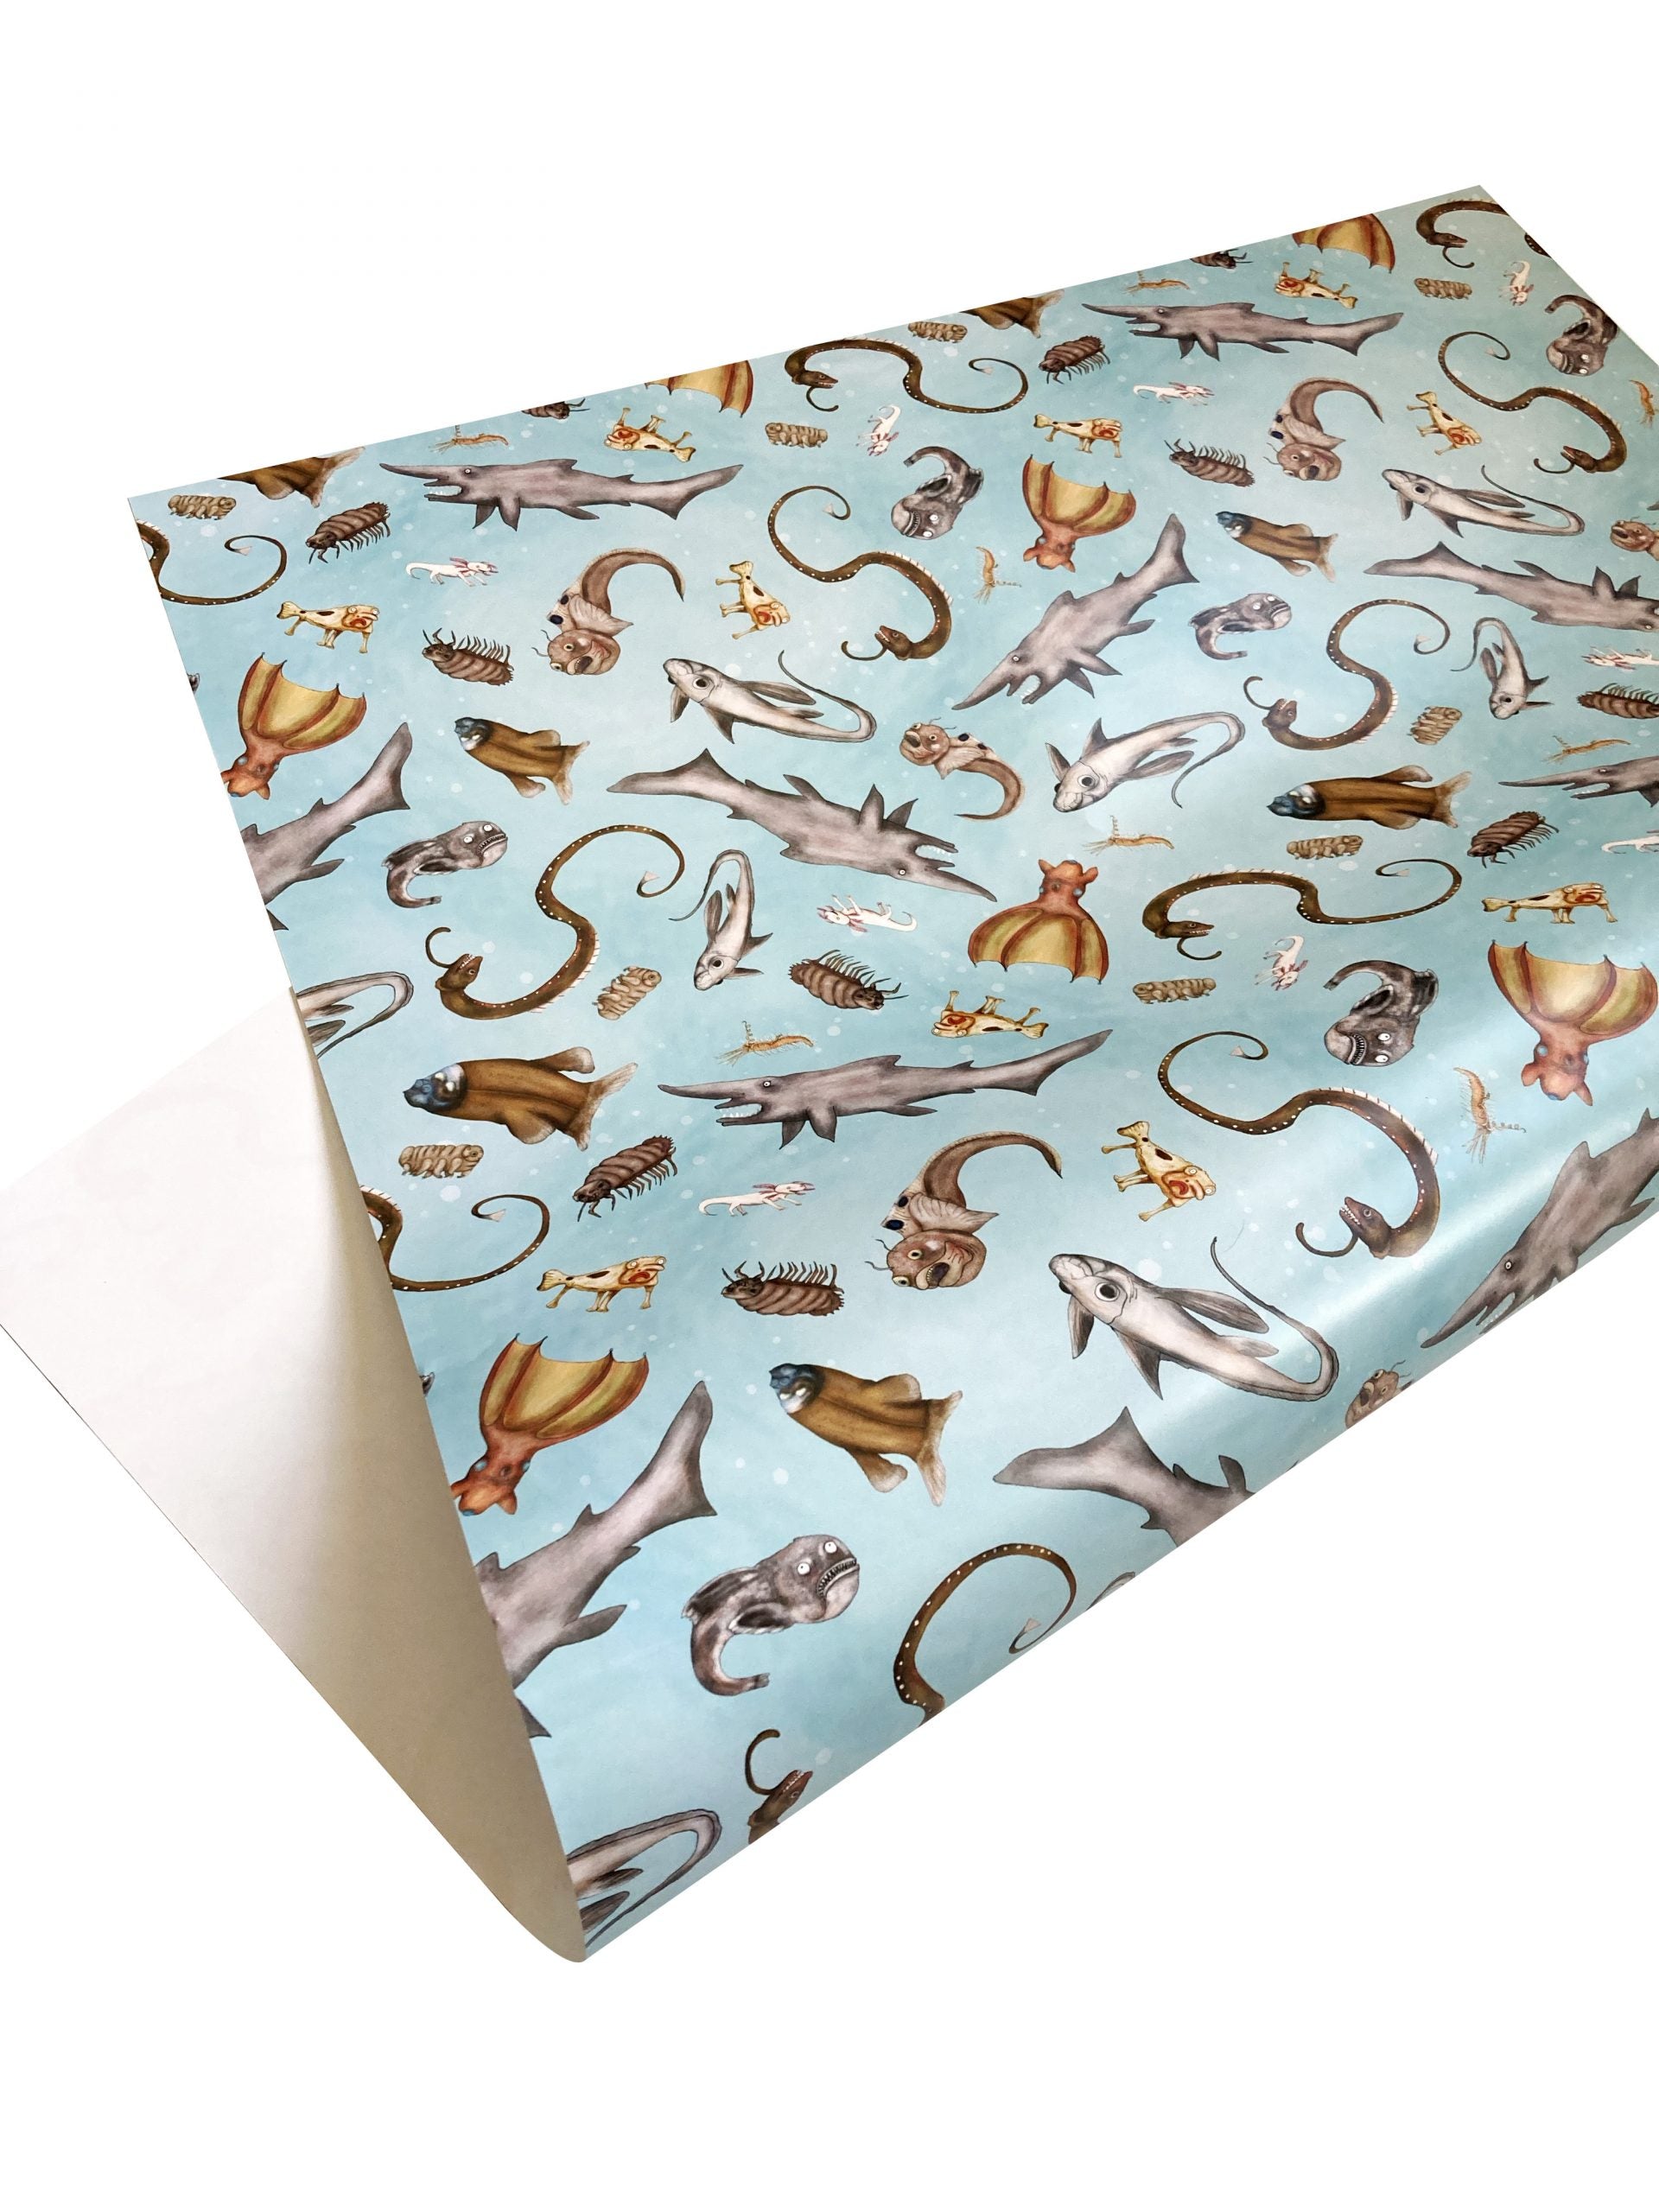 Weird Sea Creatures Wrapping Paper - Set of Three Sheets – Amelia Kieras